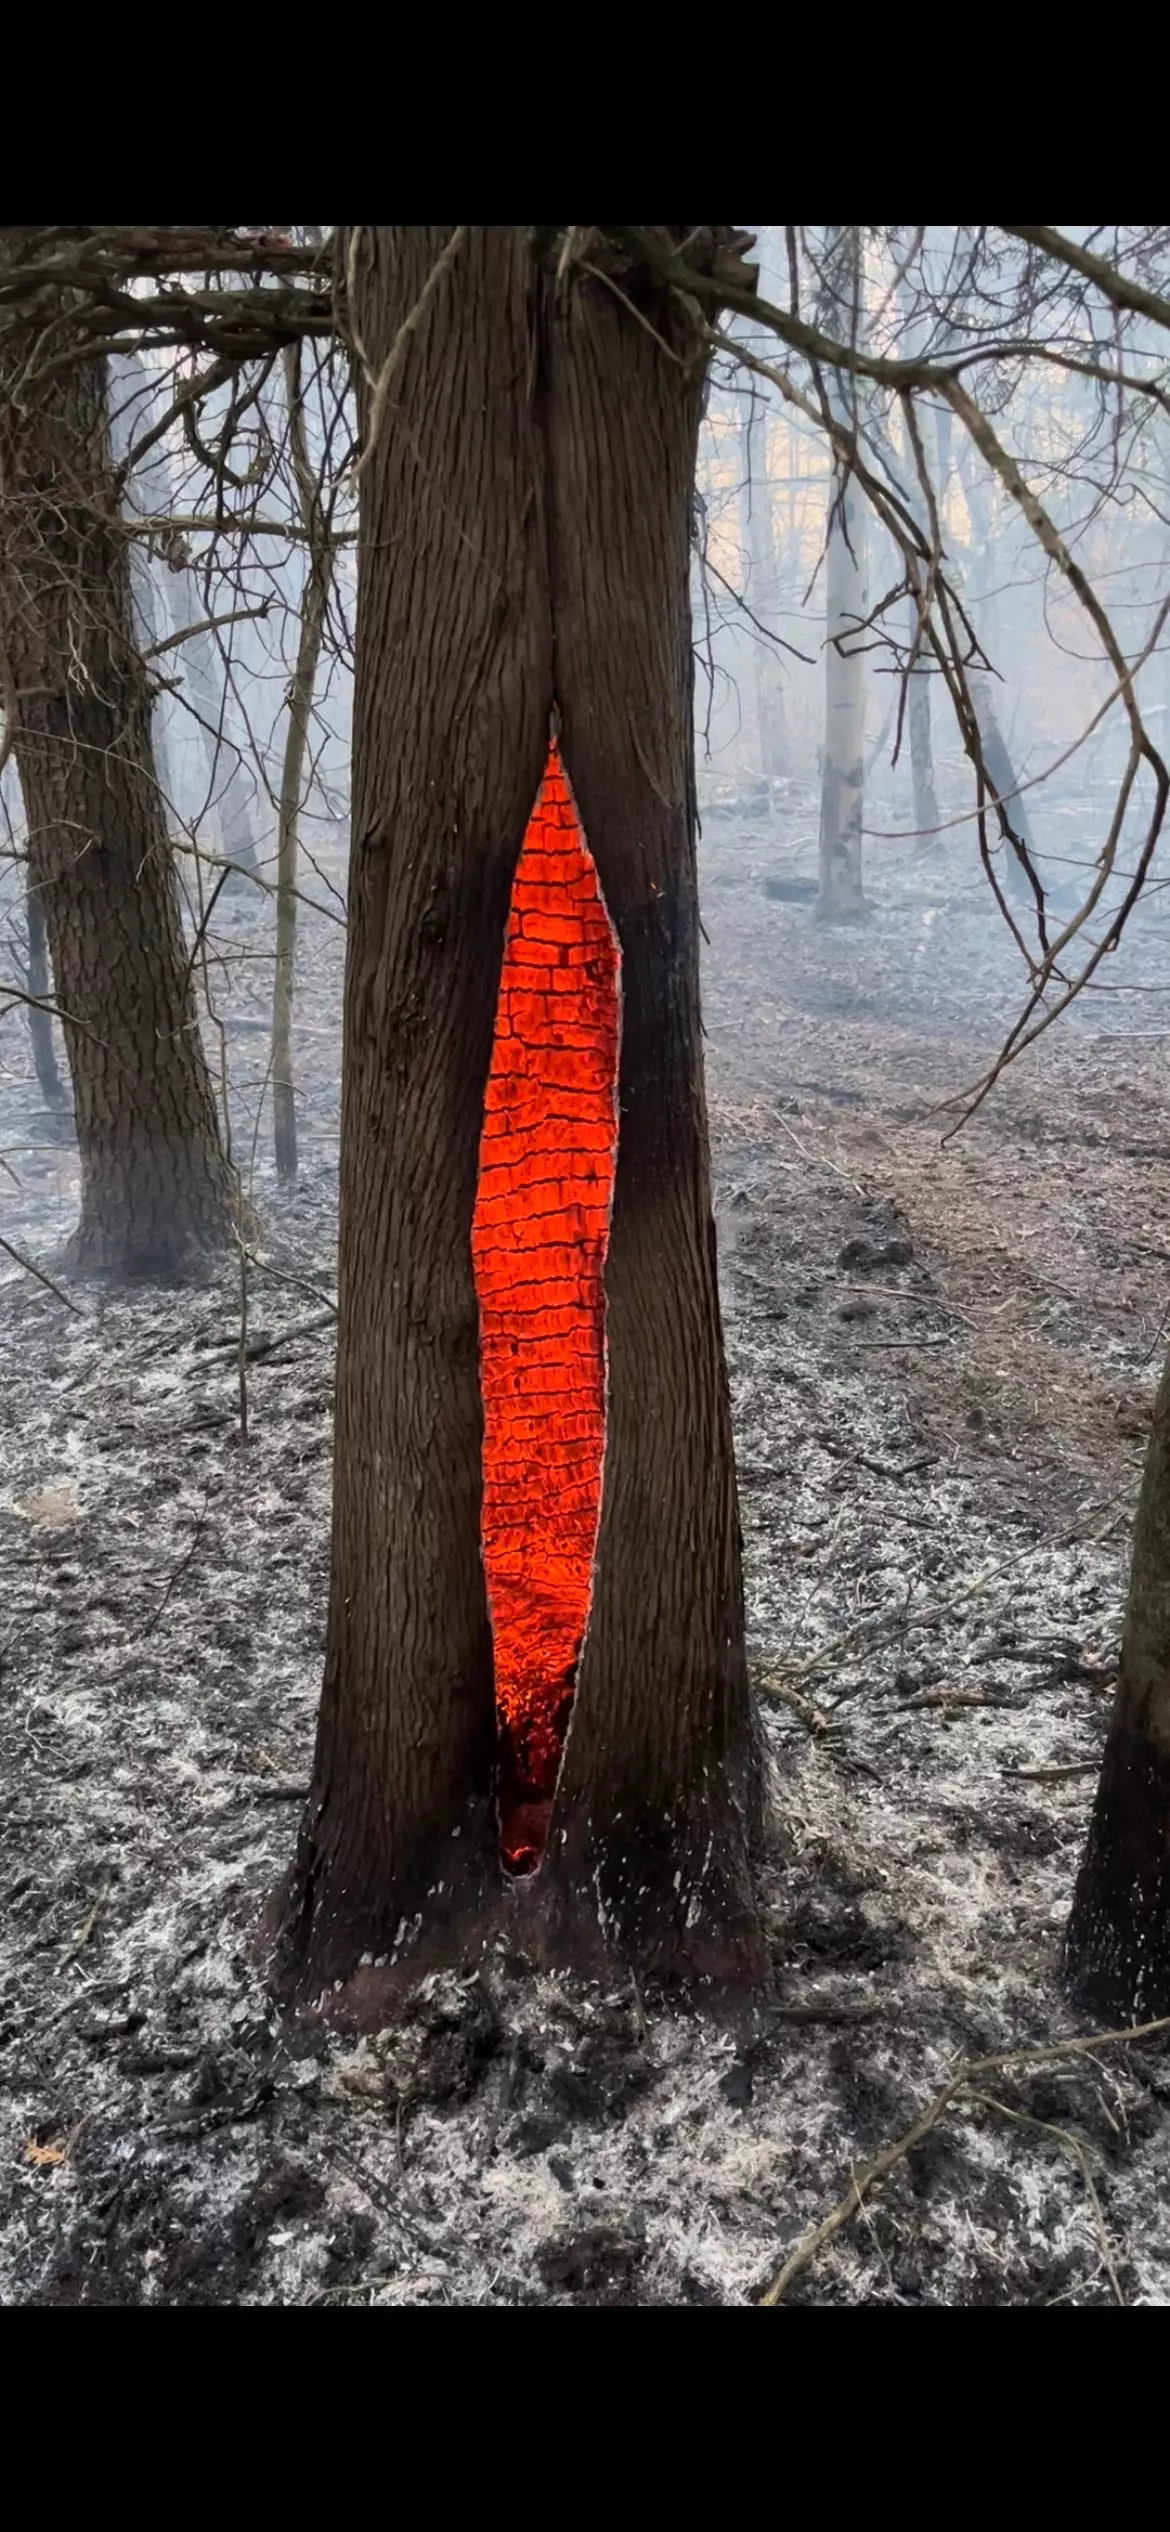 Are Those Bricks? What's Causing This Upstate NY Tree To Glow Red